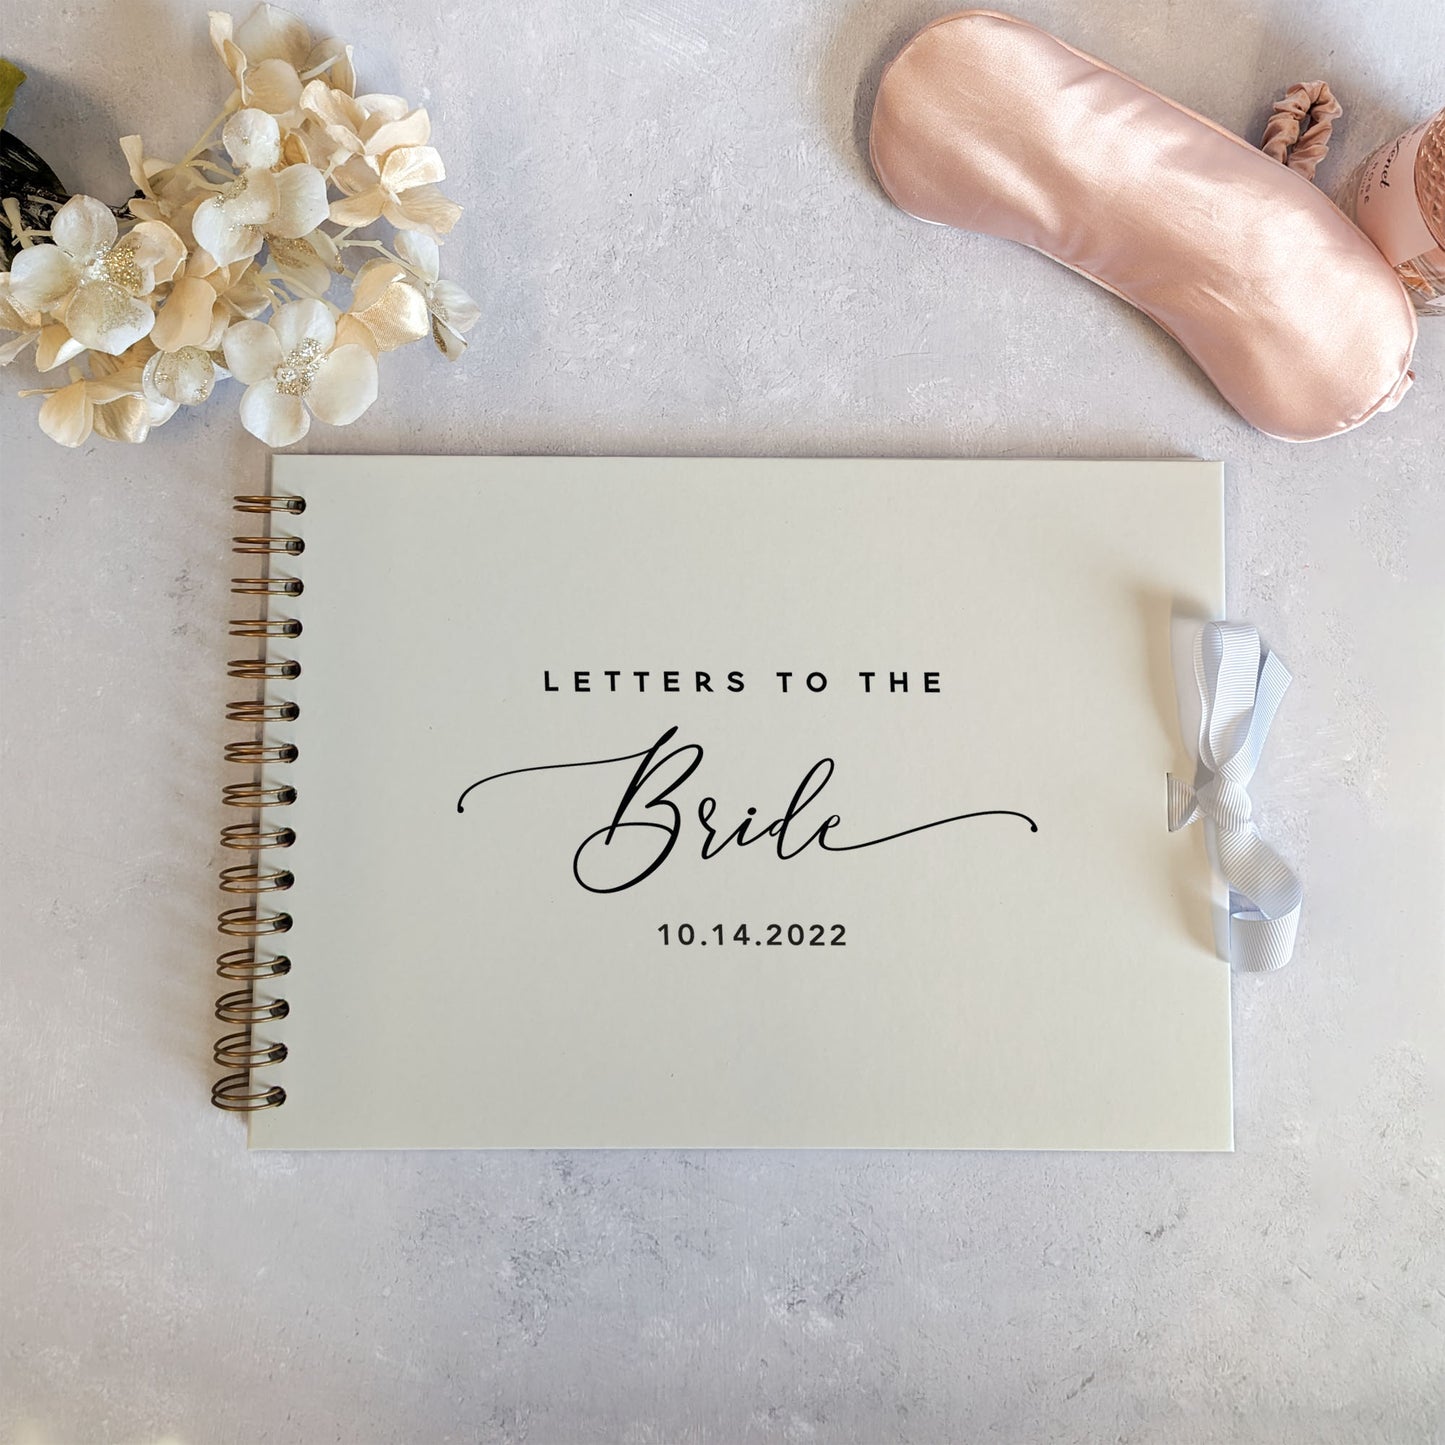 Letters to the Bride A4 Scrapbook Album - Personalised